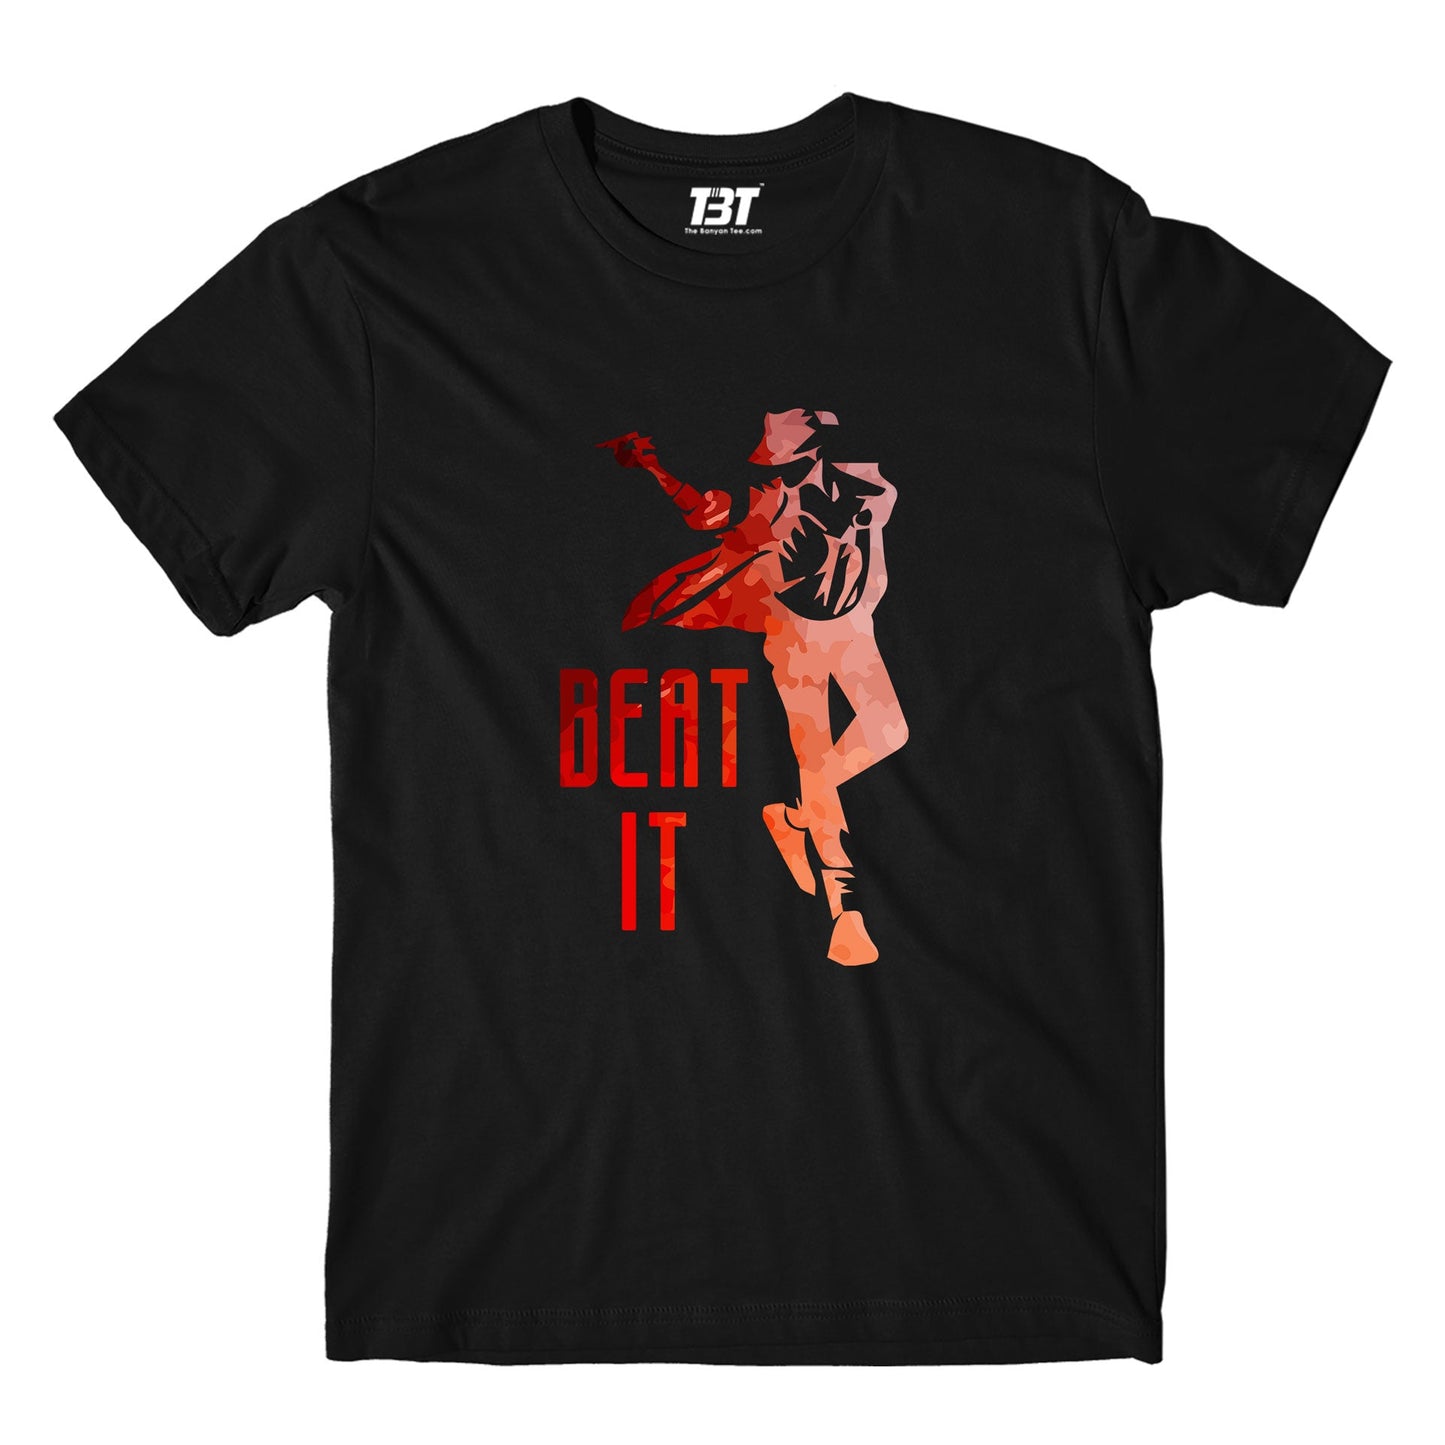 the banyan tee merch on sale Michael Jackson T shirt - On Sale - M (Chest size 40 IN)